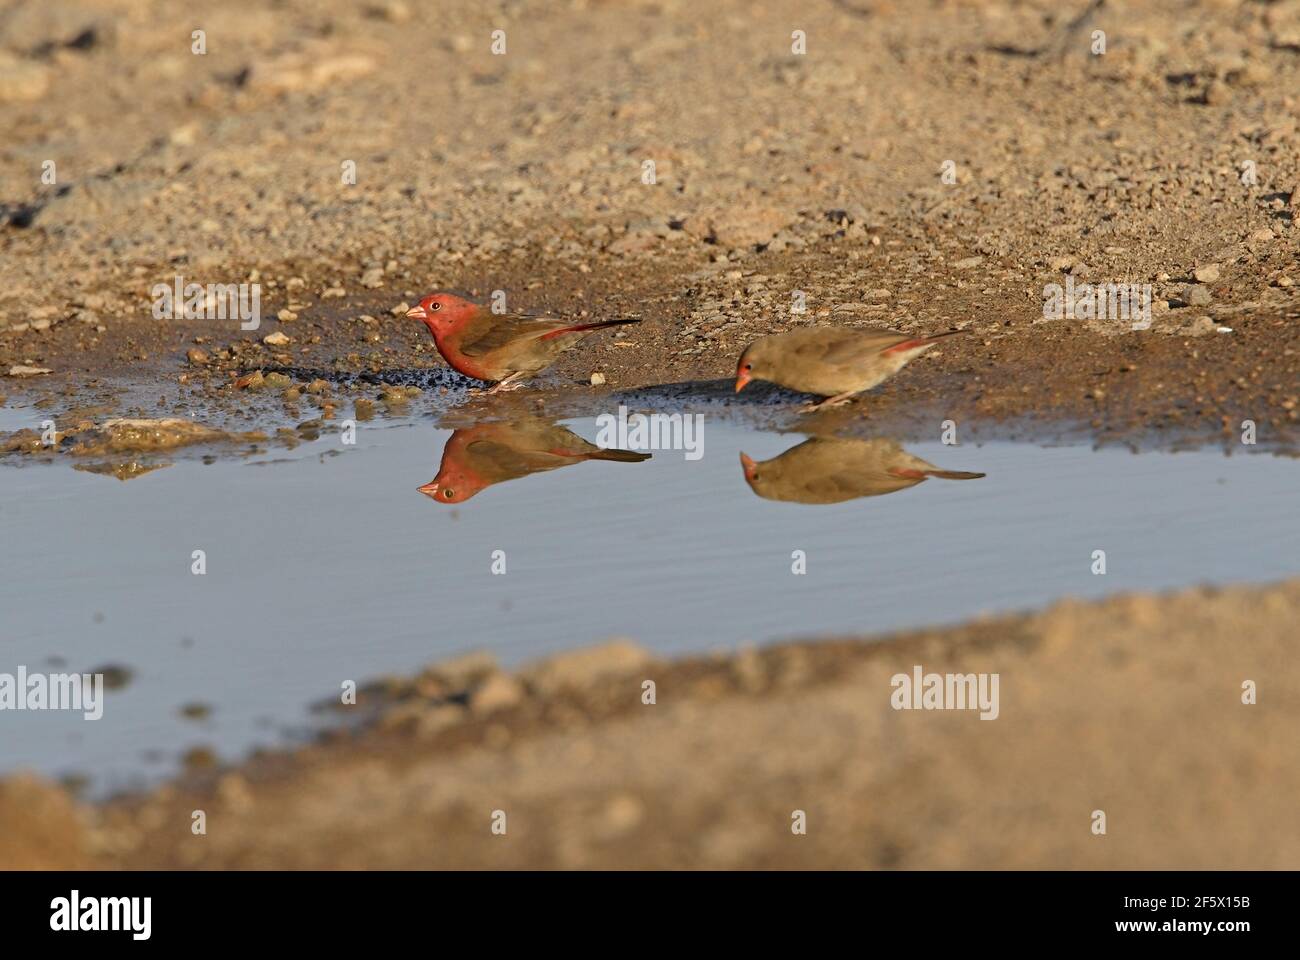 Red-billed Firefinch (Lagonosticta senegala) pair drinking from pool with reflection Awash NP, Ethiopia               April Stock Photo